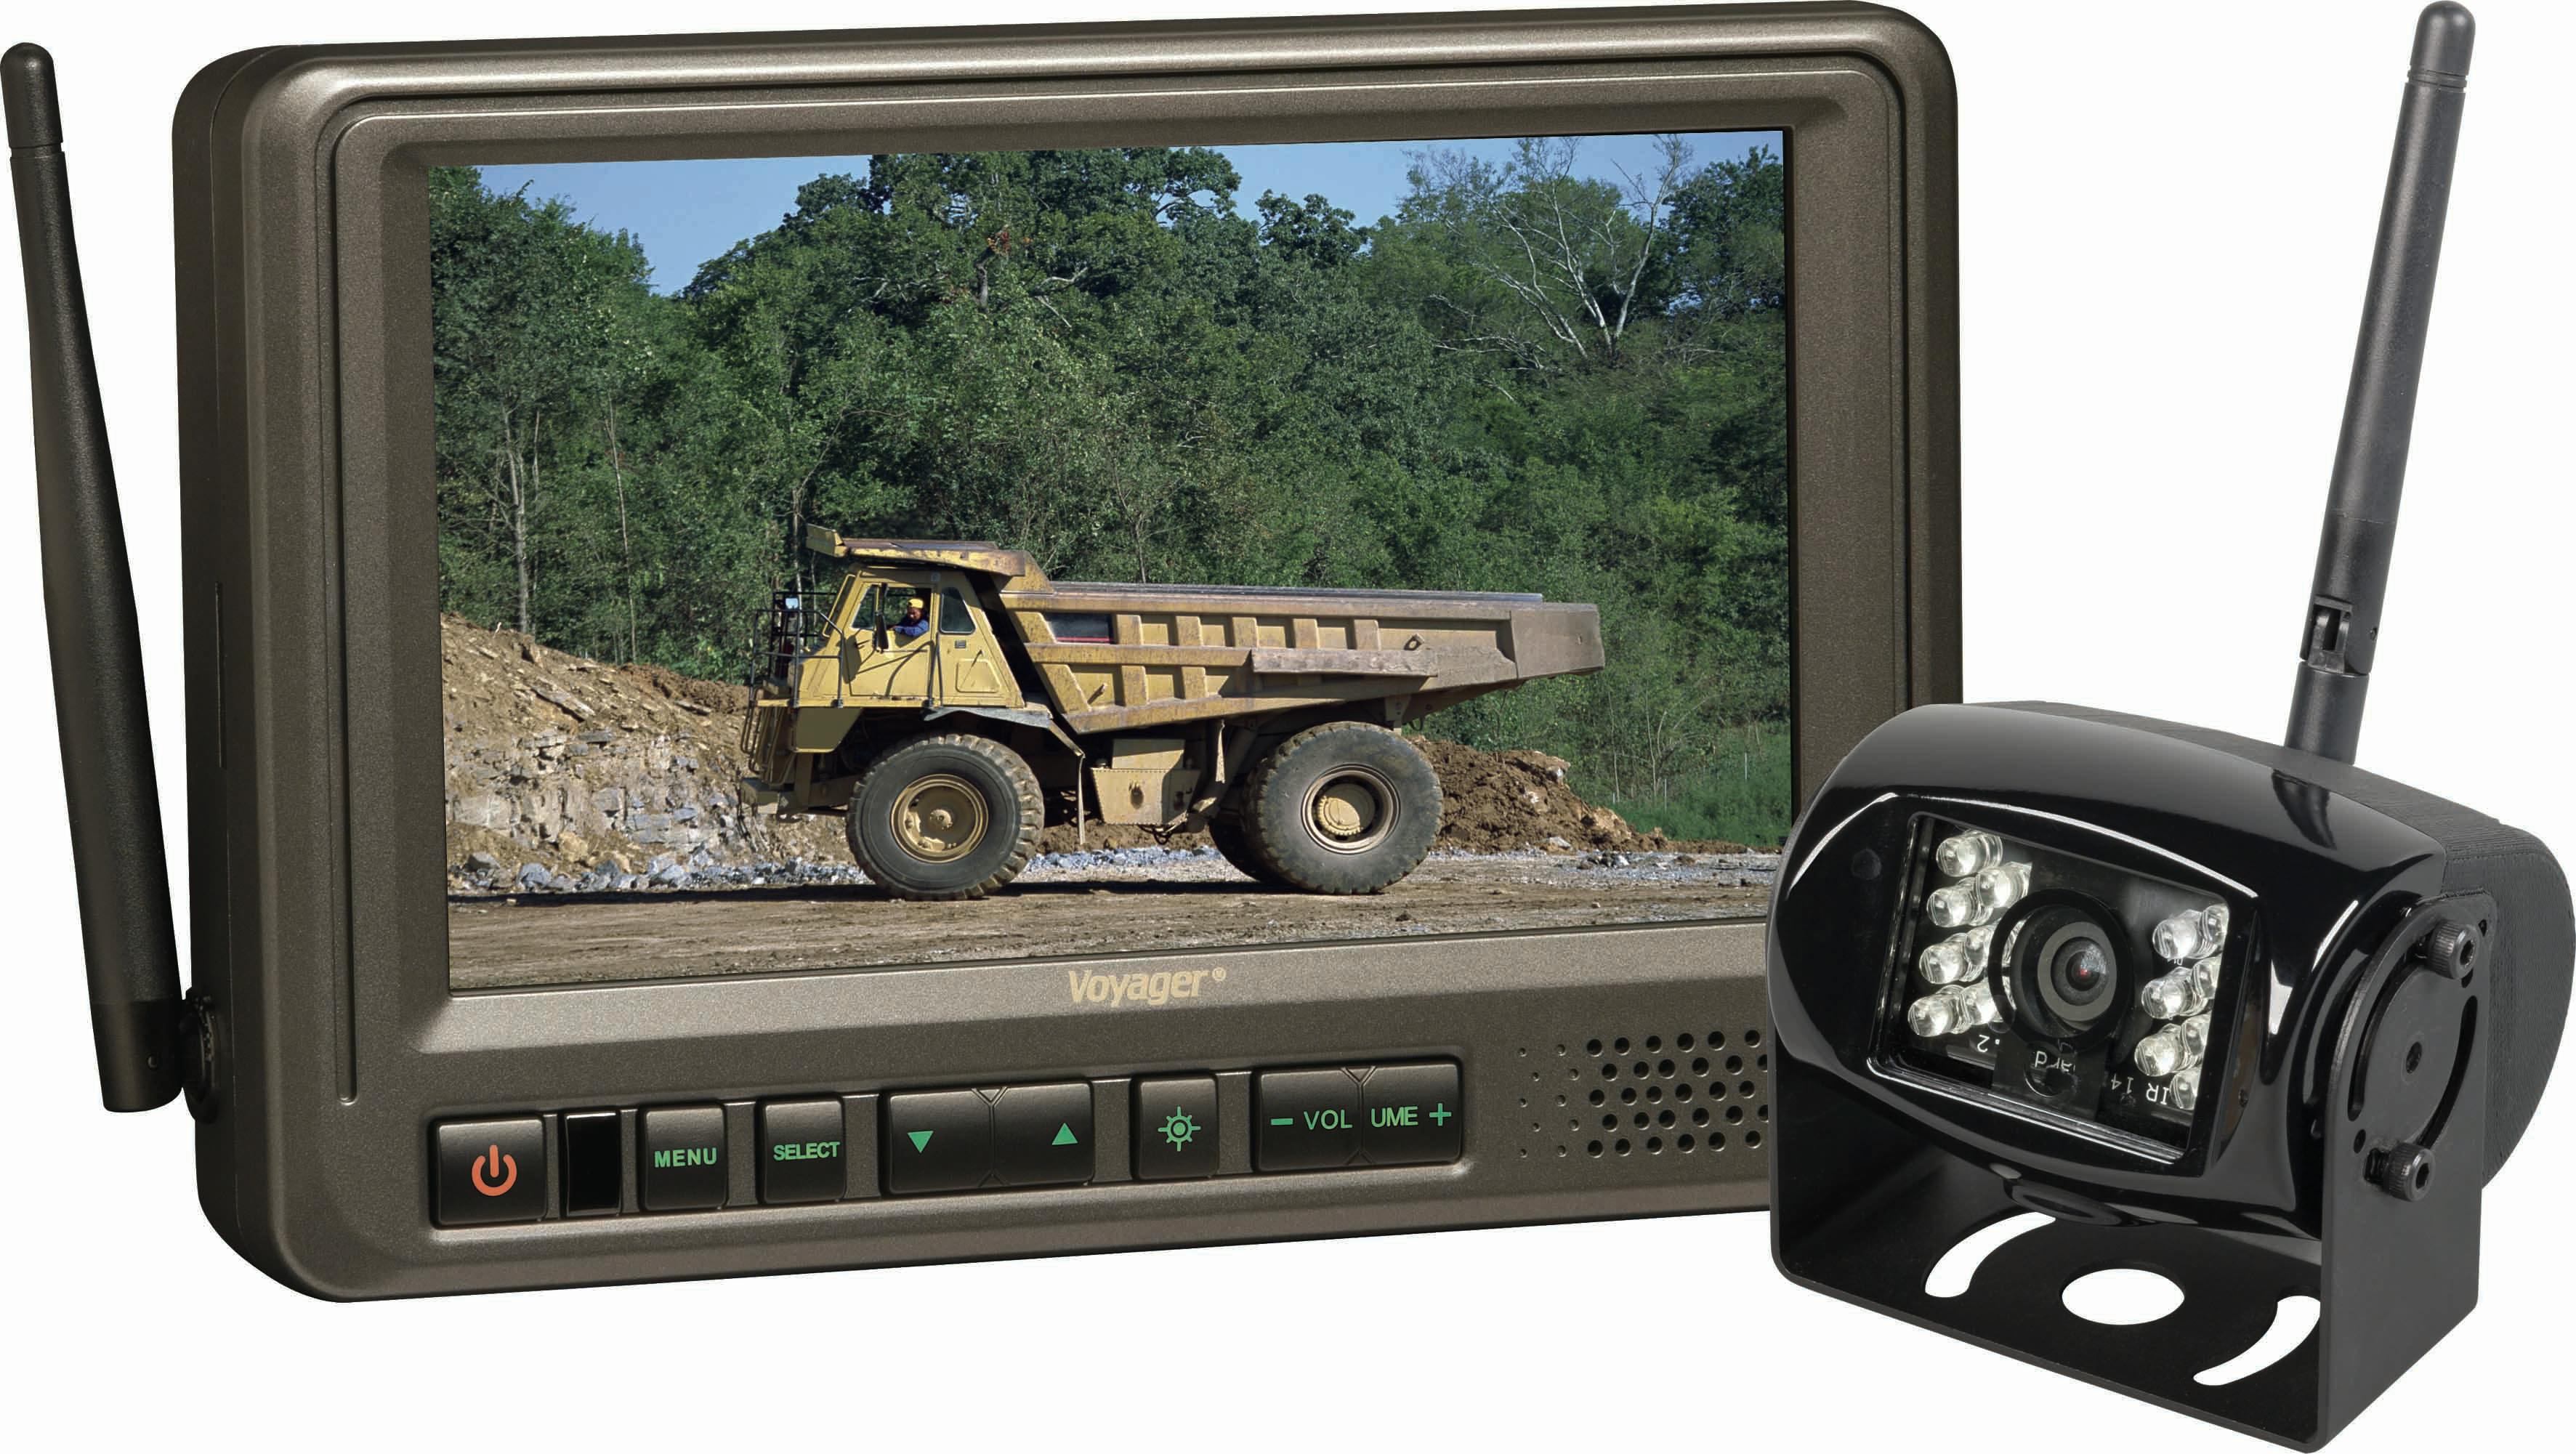 ASA introduces Digital Wireless Observation System 